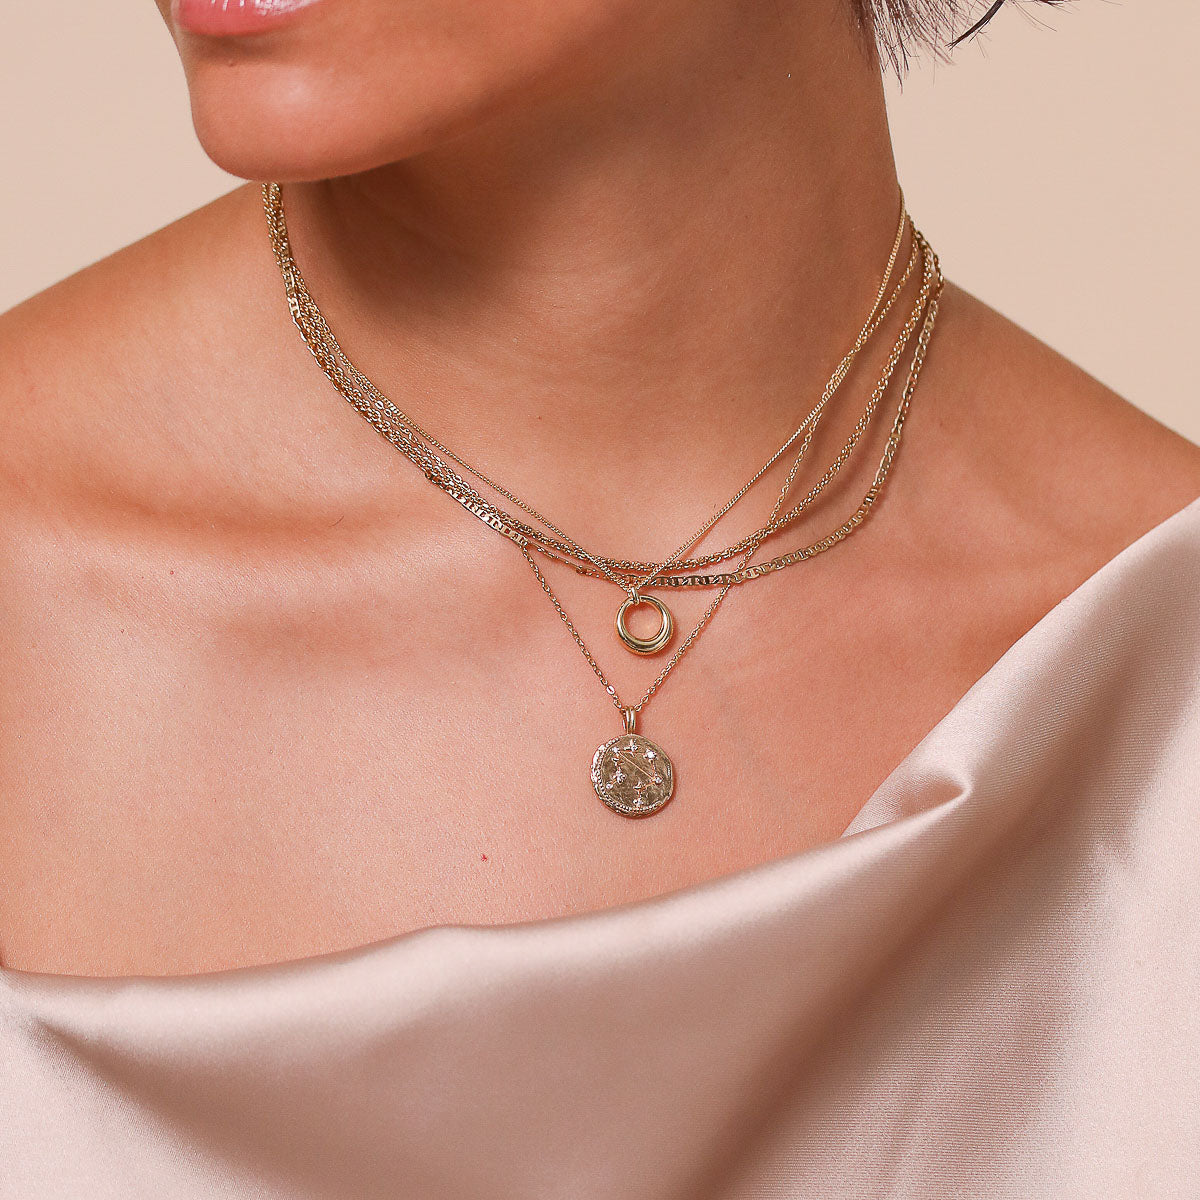 Libra Zodiac Pendant Necklace in Gold worn layered with necklaces